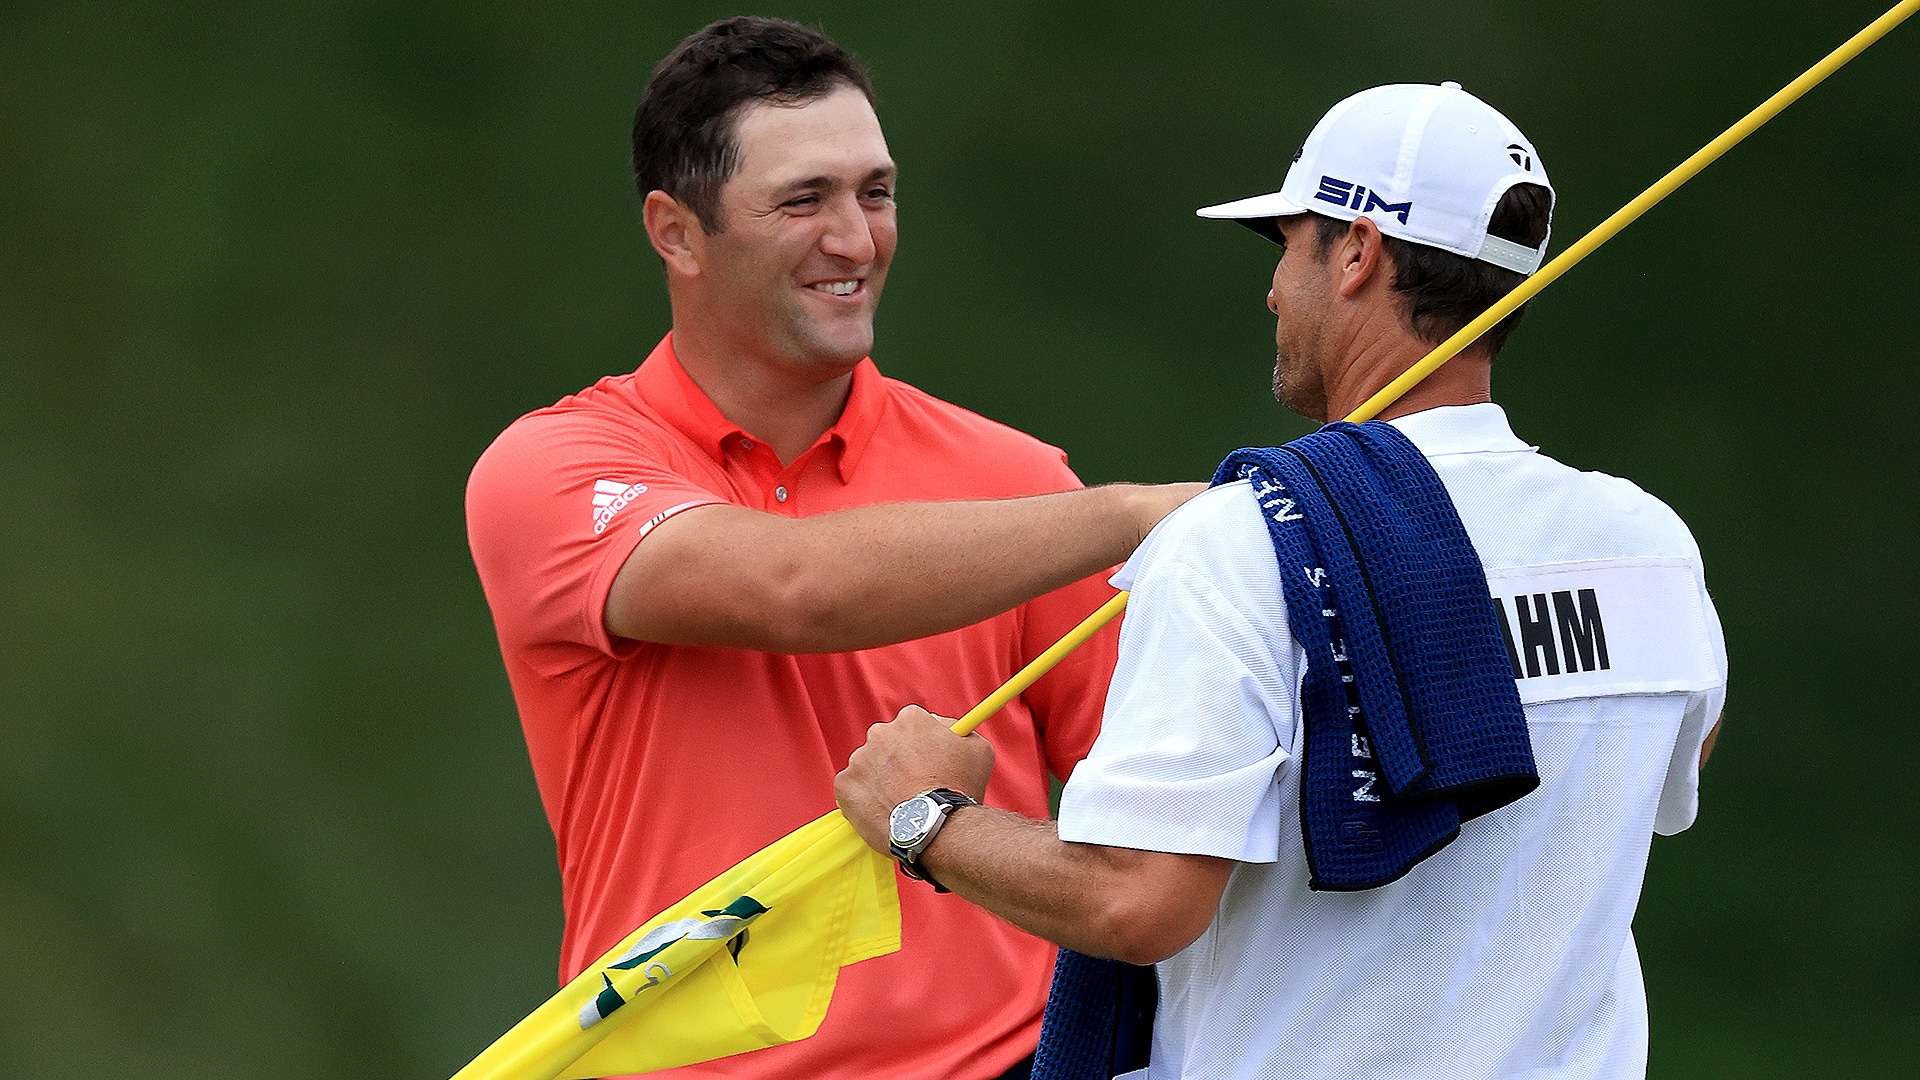 Memorial purse payout: A No. 1 ranking and nearly $1.7 million, to boot, for Jon Rahm